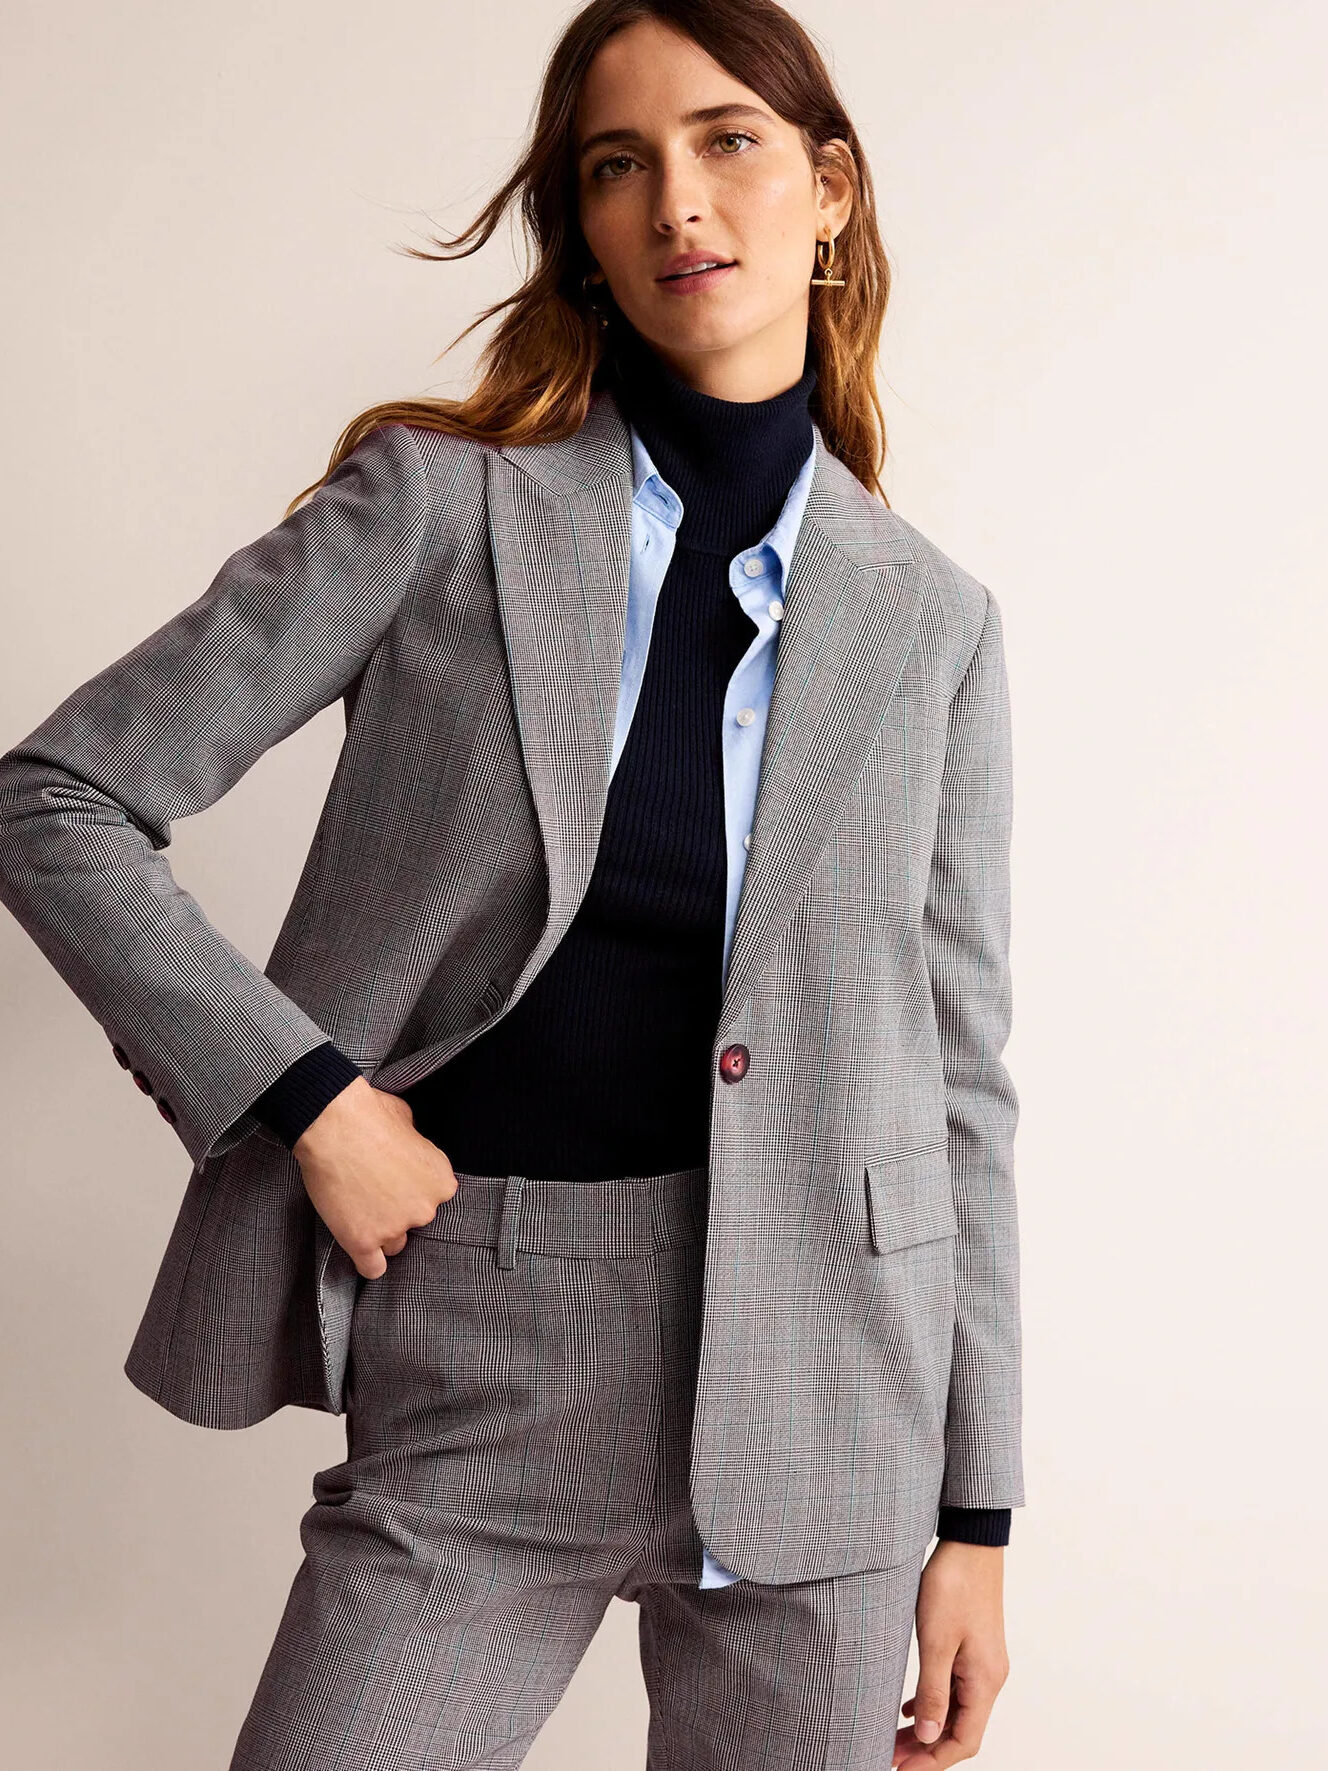 A model wearing a matching grey blazer and dress pants from Boden.